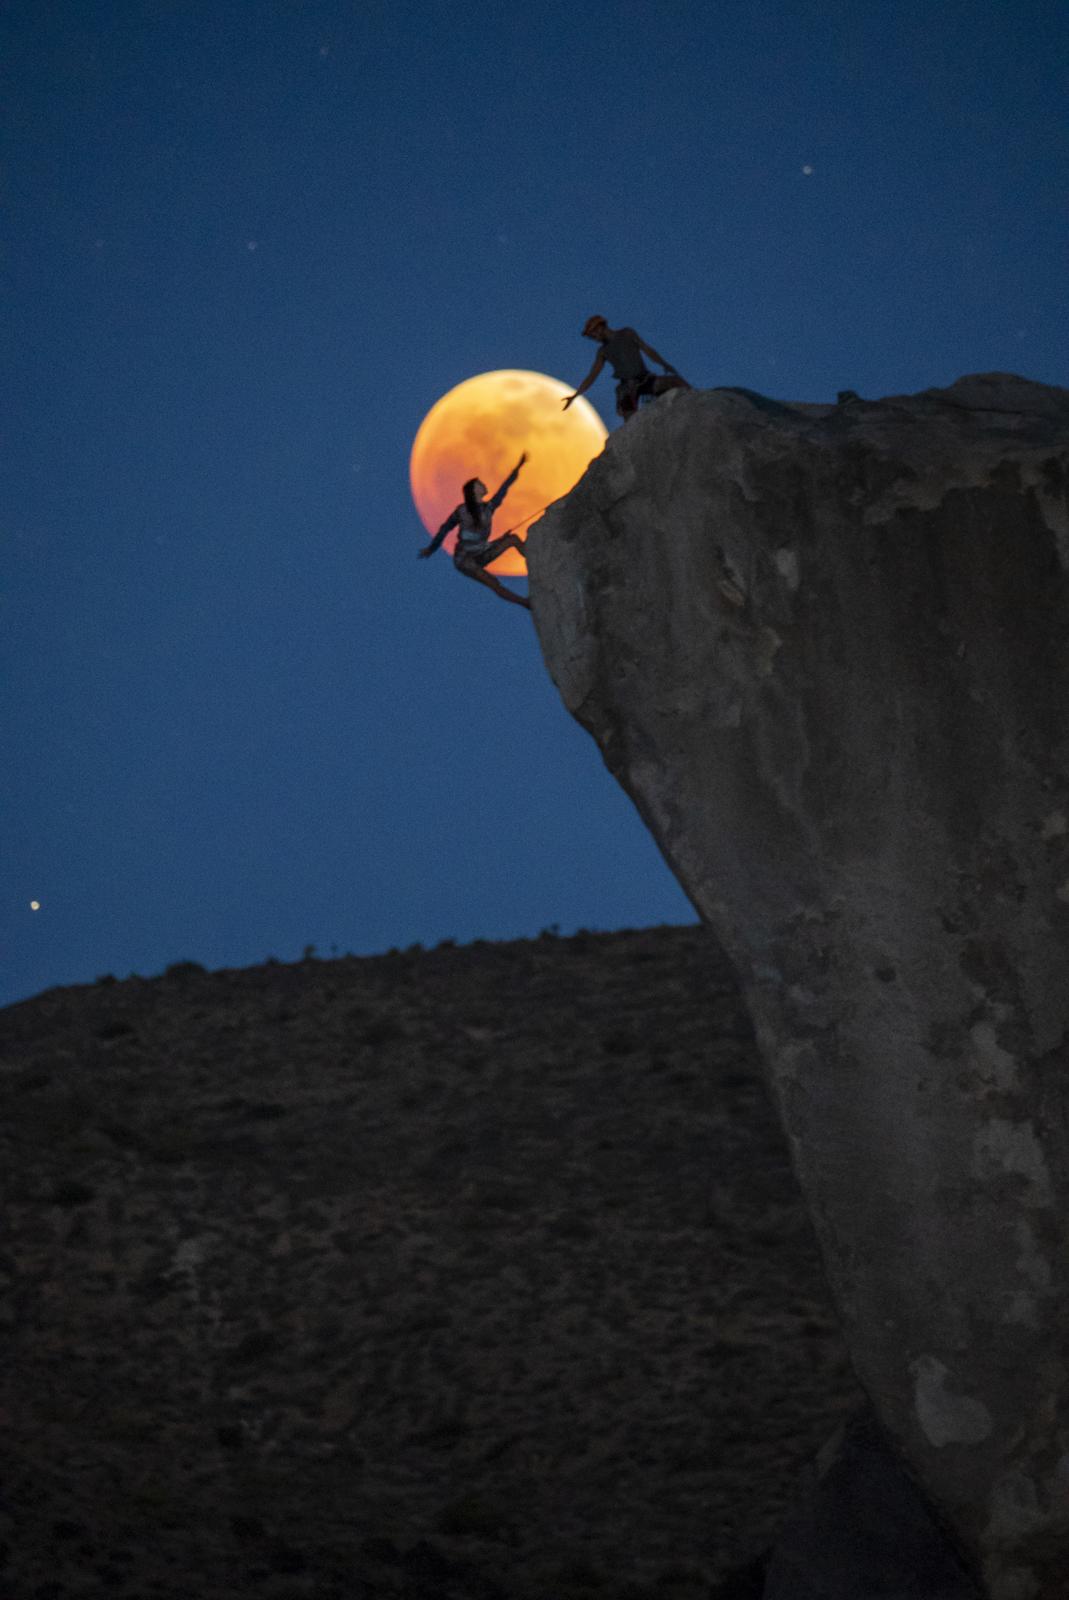 Silhouettes of rock climbers climb an overhanging rock with full Moon behind